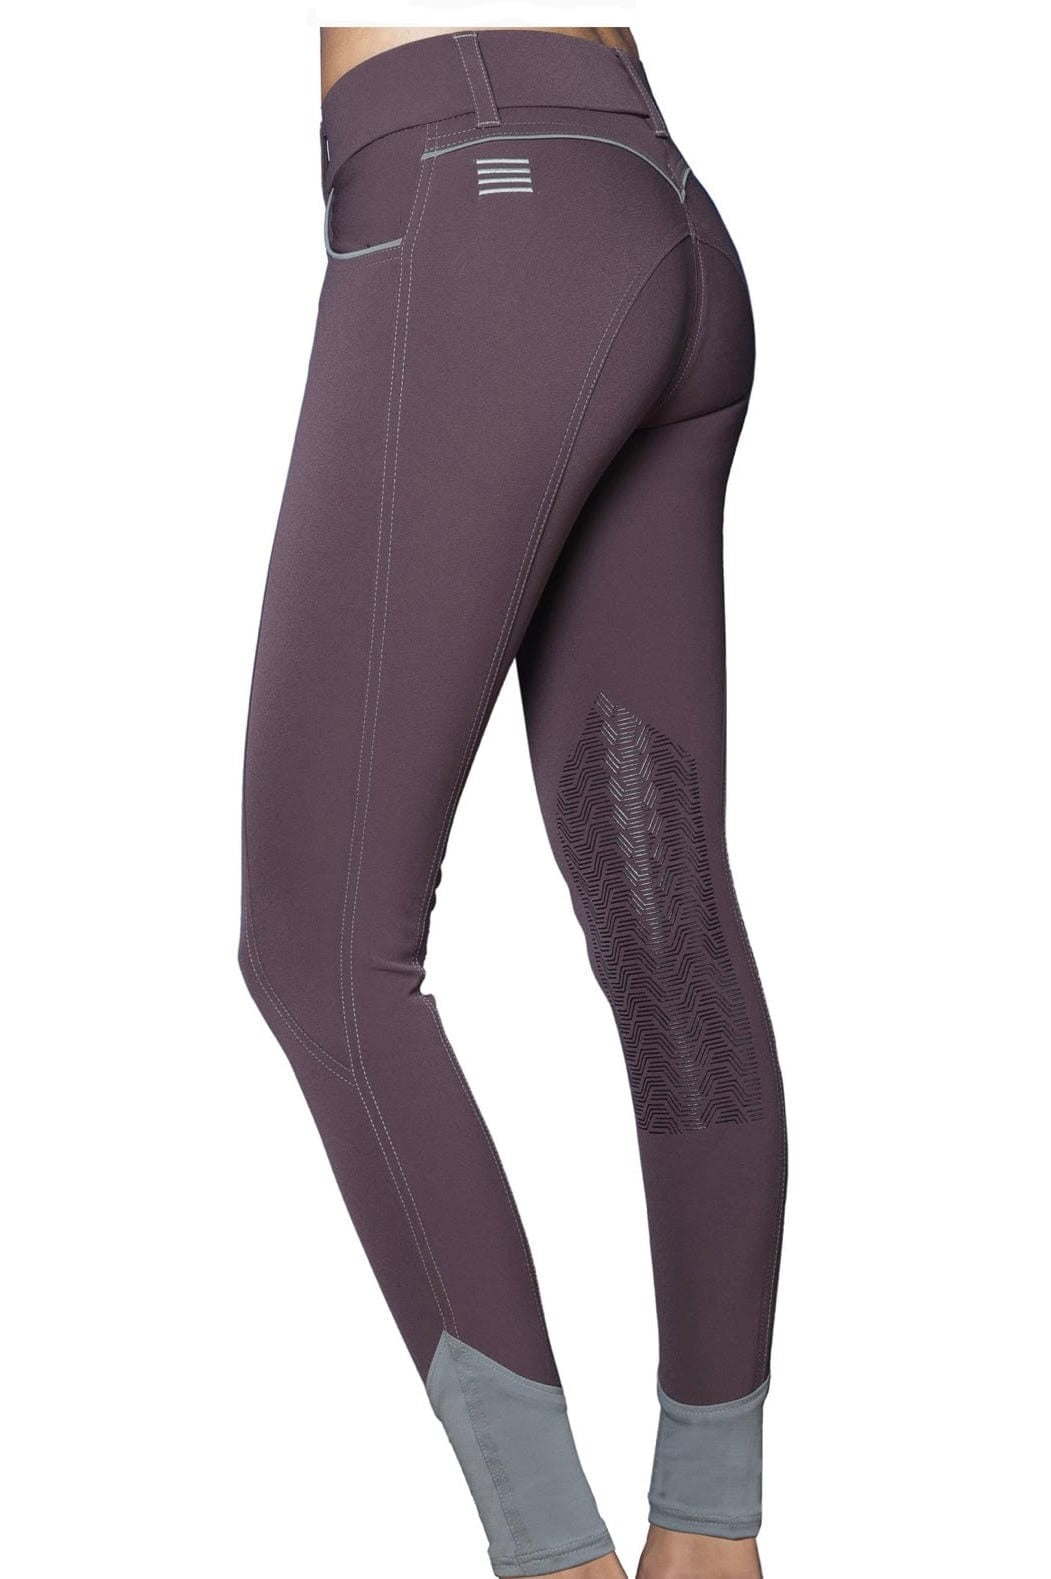 GhoDho Breeches GhoDho Elara T-600 Style Breeches - Eggplant equestrian team apparel online tack store mobile tack store custom farm apparel custom show stable clothing equestrian lifestyle horse show clothing riding clothes horses equestrian tack store